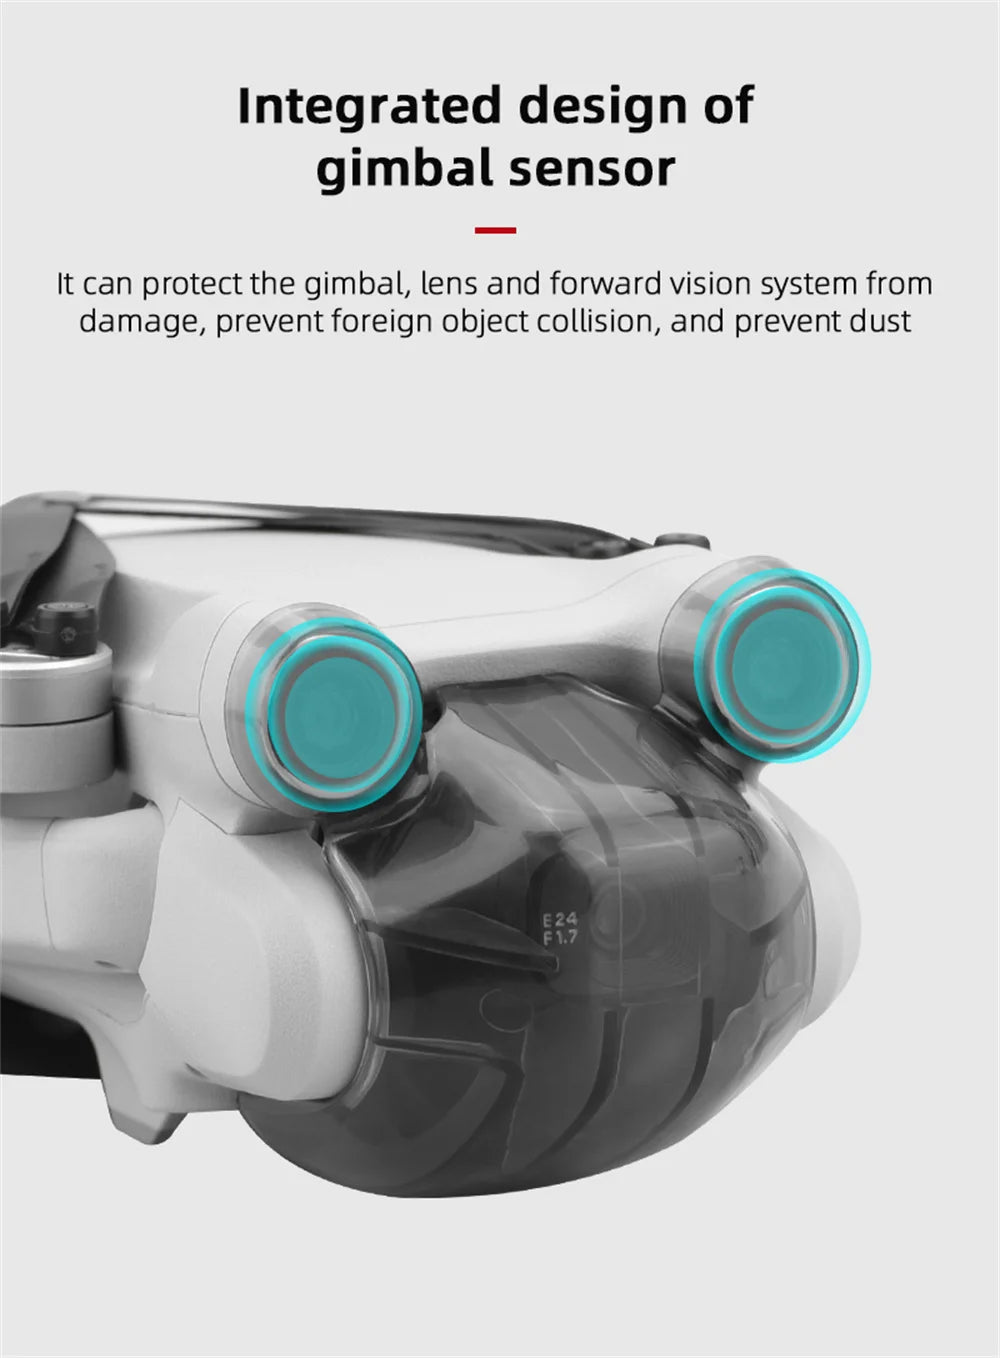 E24 Fi7 can protect the gimbal, lens and forward vision system from damage